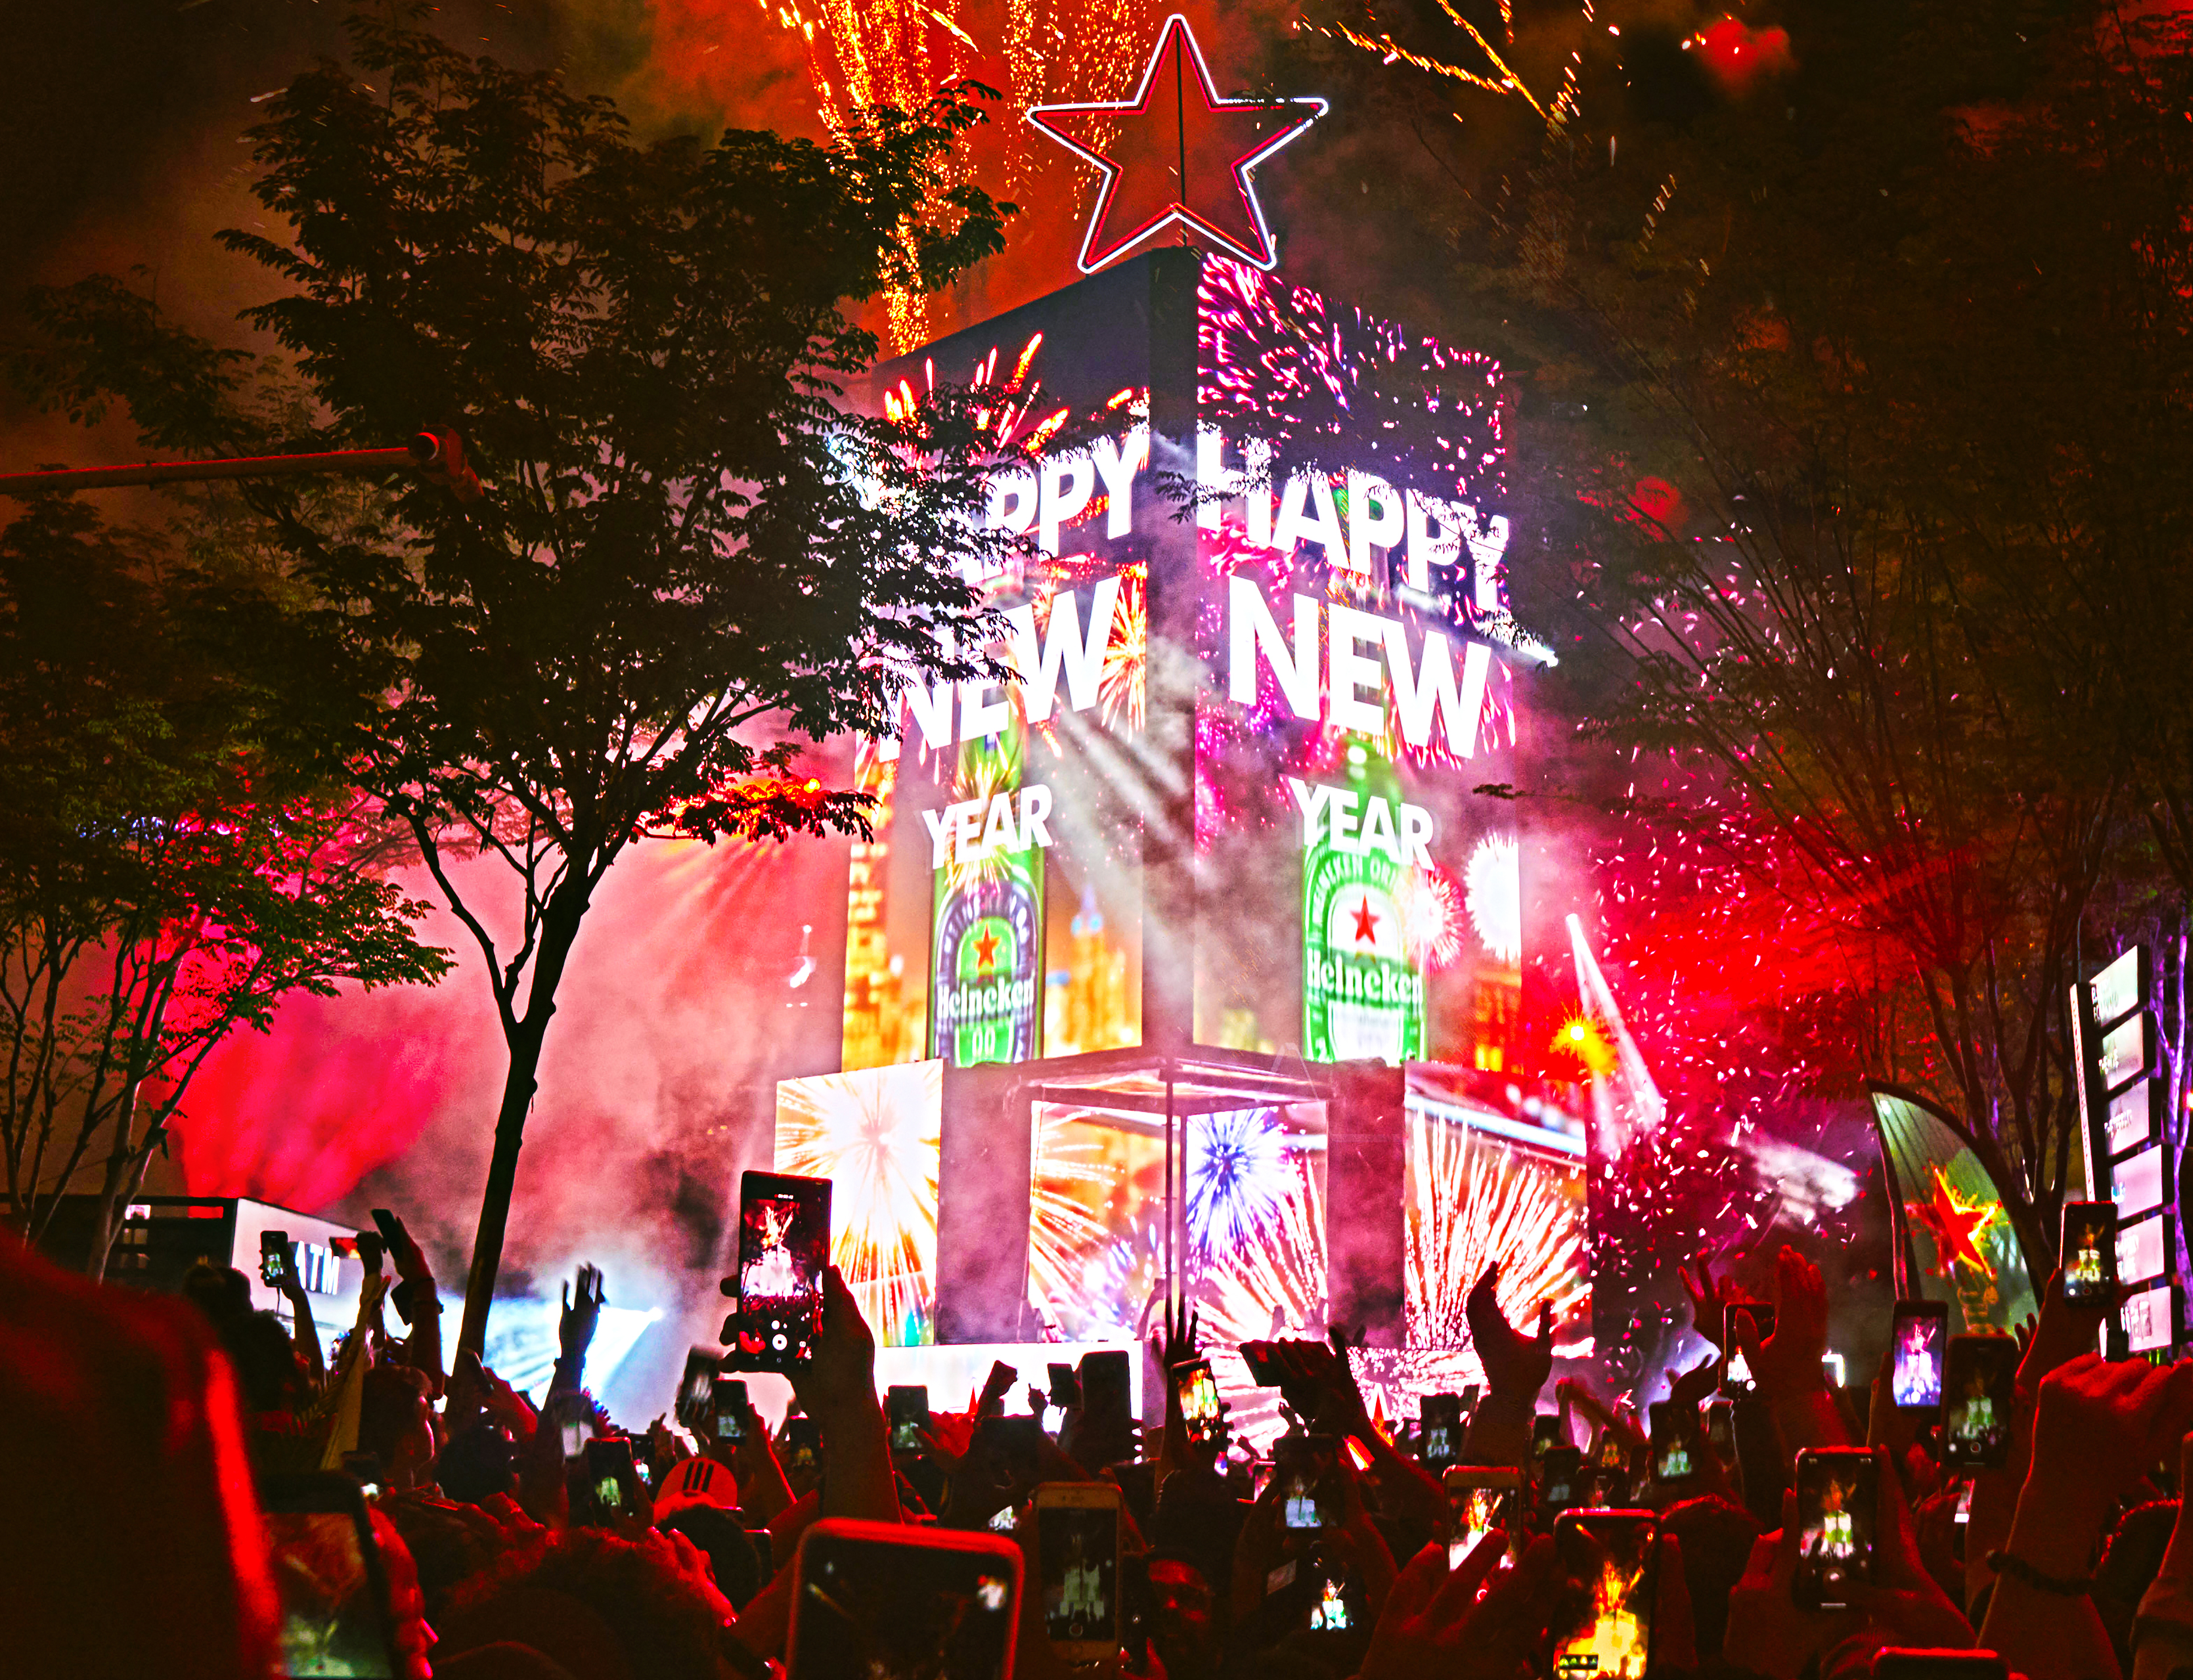 Heineken® ushered in the new year with a dazzling display of fireworks-v2